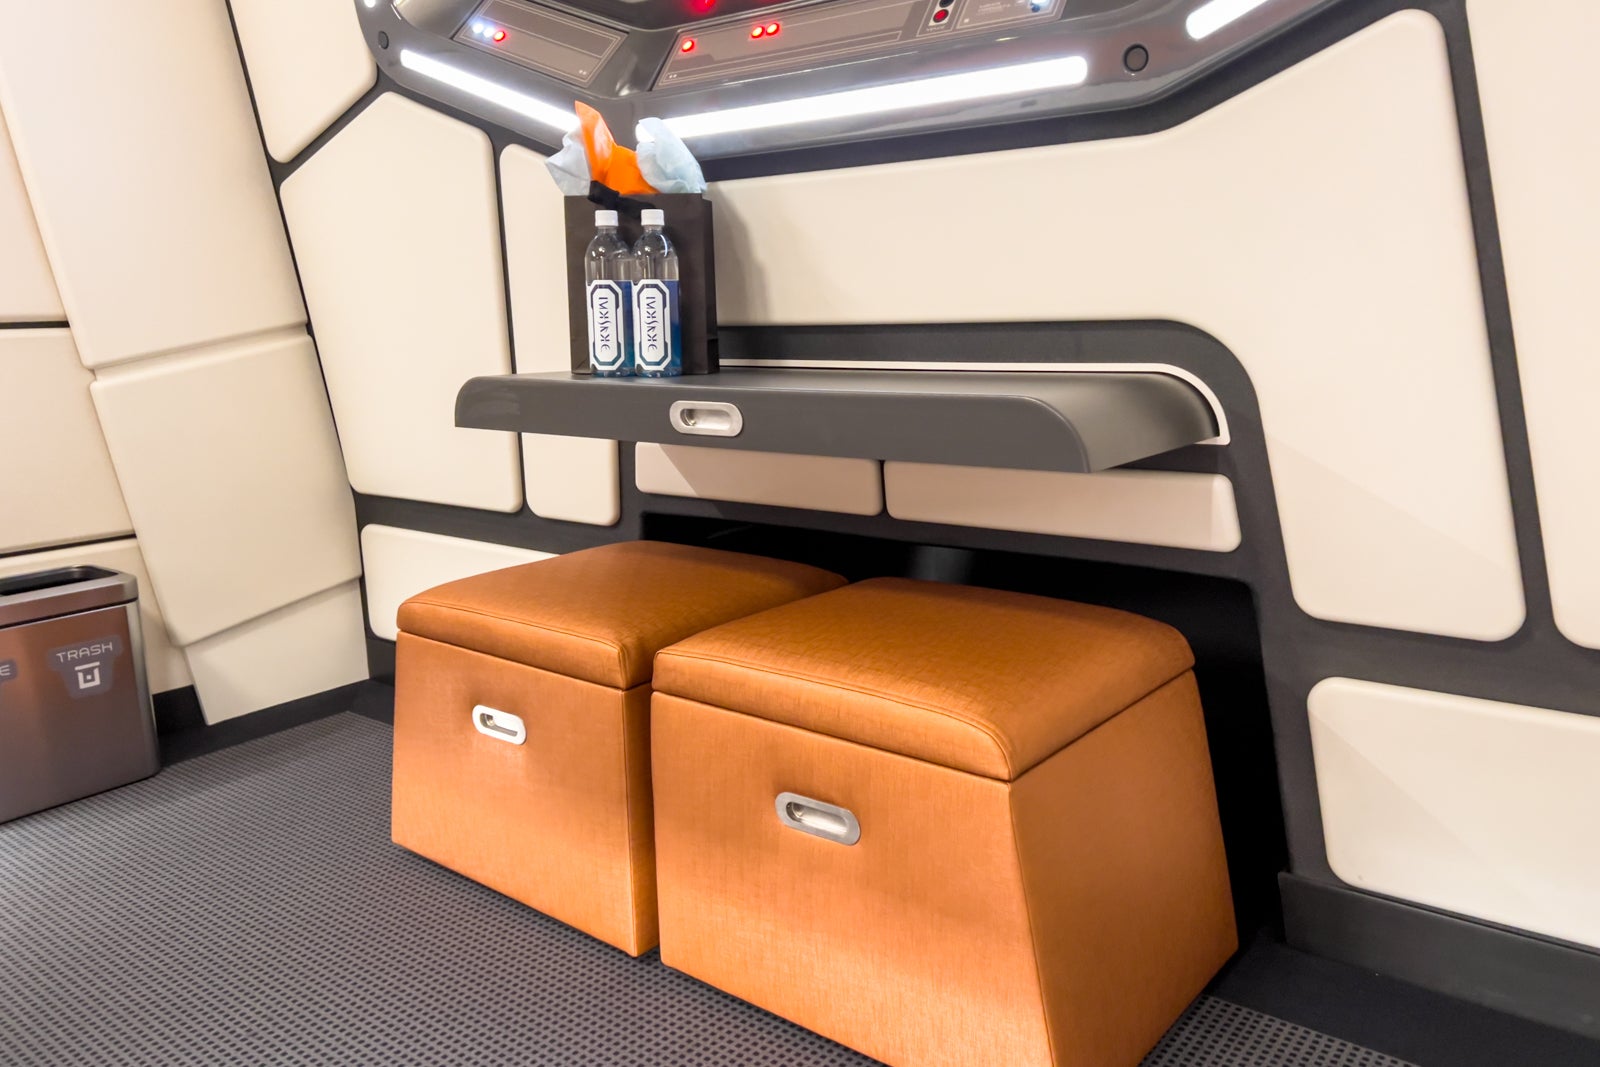 The pullout desk and stools in the Starcruiser cabin.